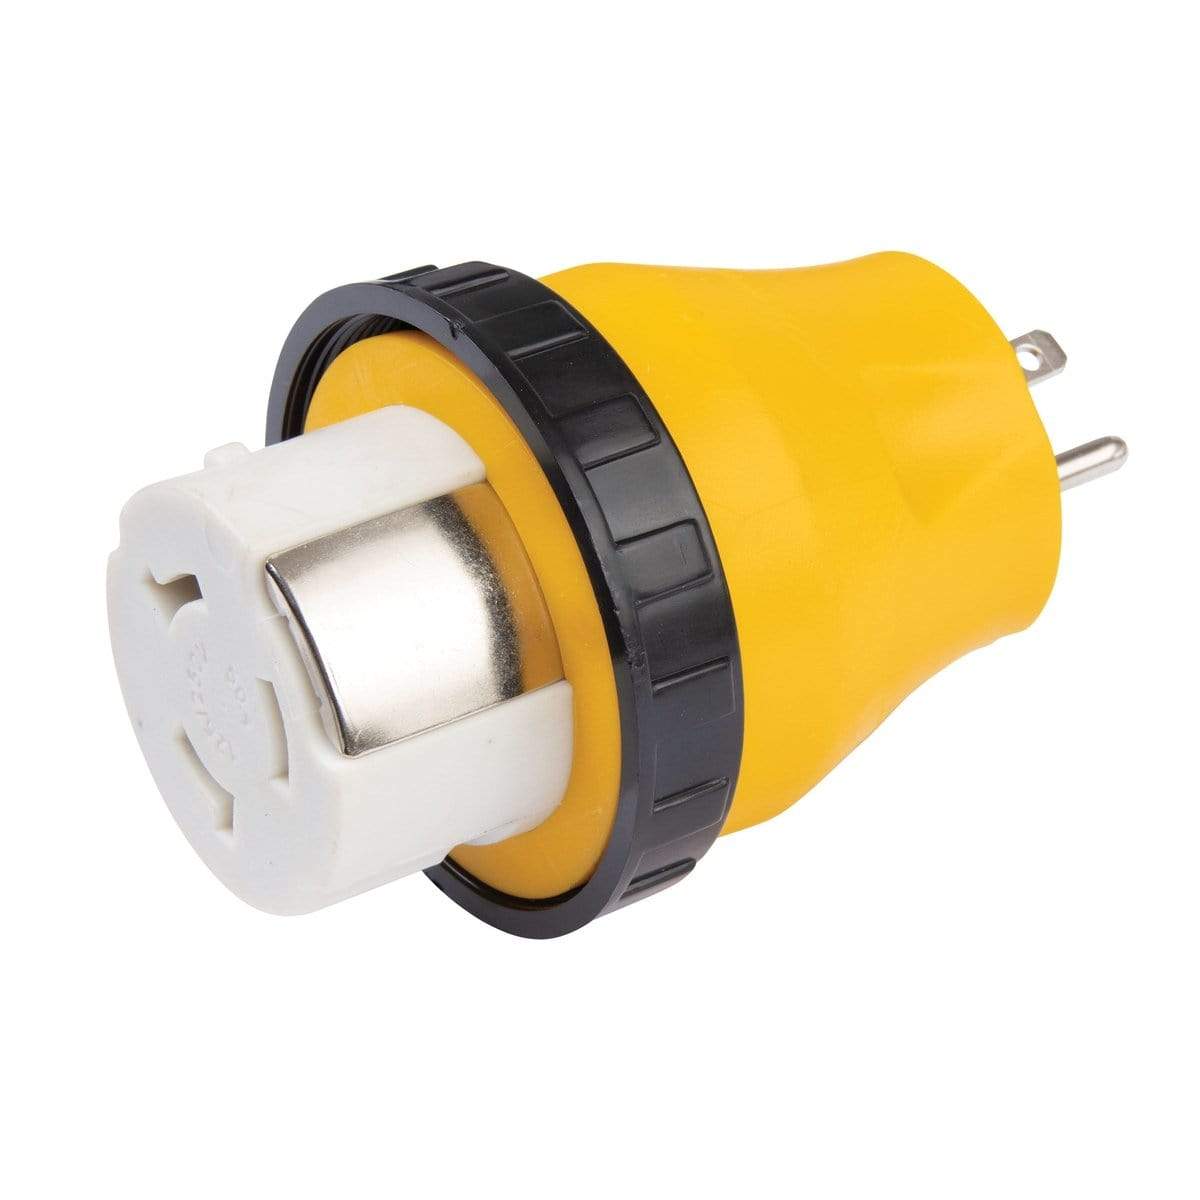 ParkPower Qualifies for Free Shipping ParkPower 15a Male 50a Female Adapter #1550RVTLA